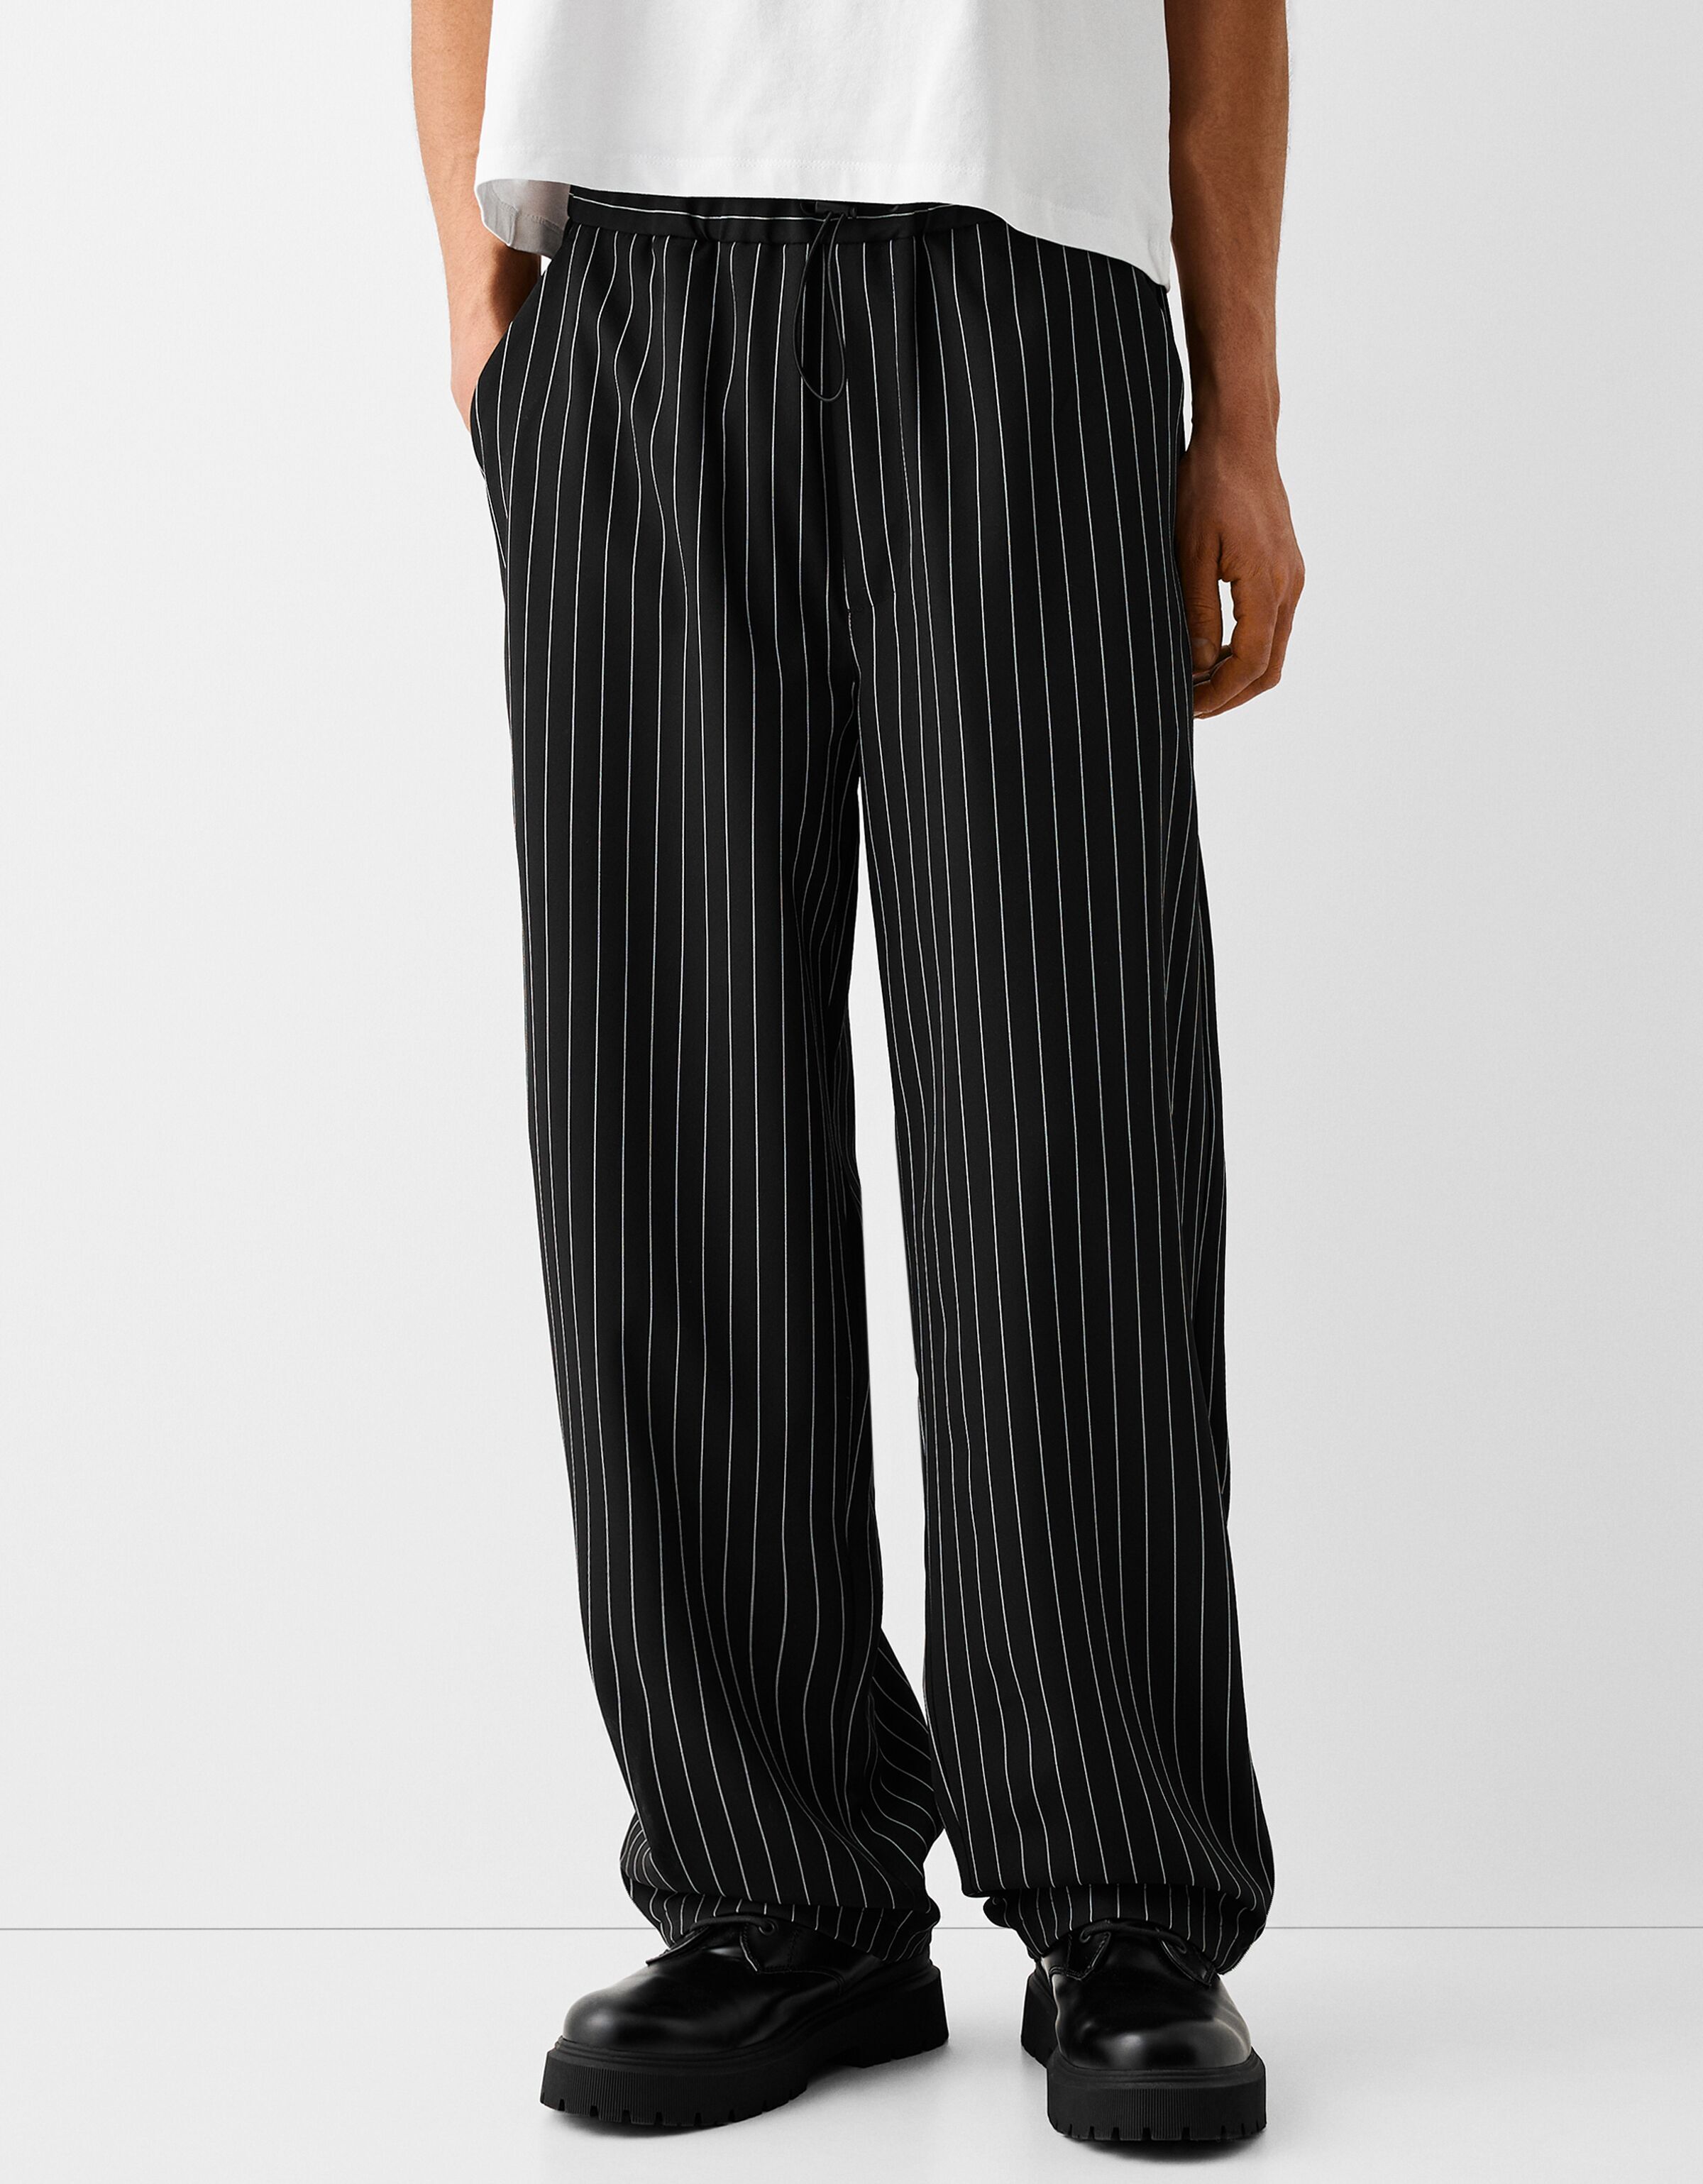 BERSHKA (JAPAN) Striped High Waisted Trousers, Women's Fashion, Bottoms,  Other Bottoms on Carousell